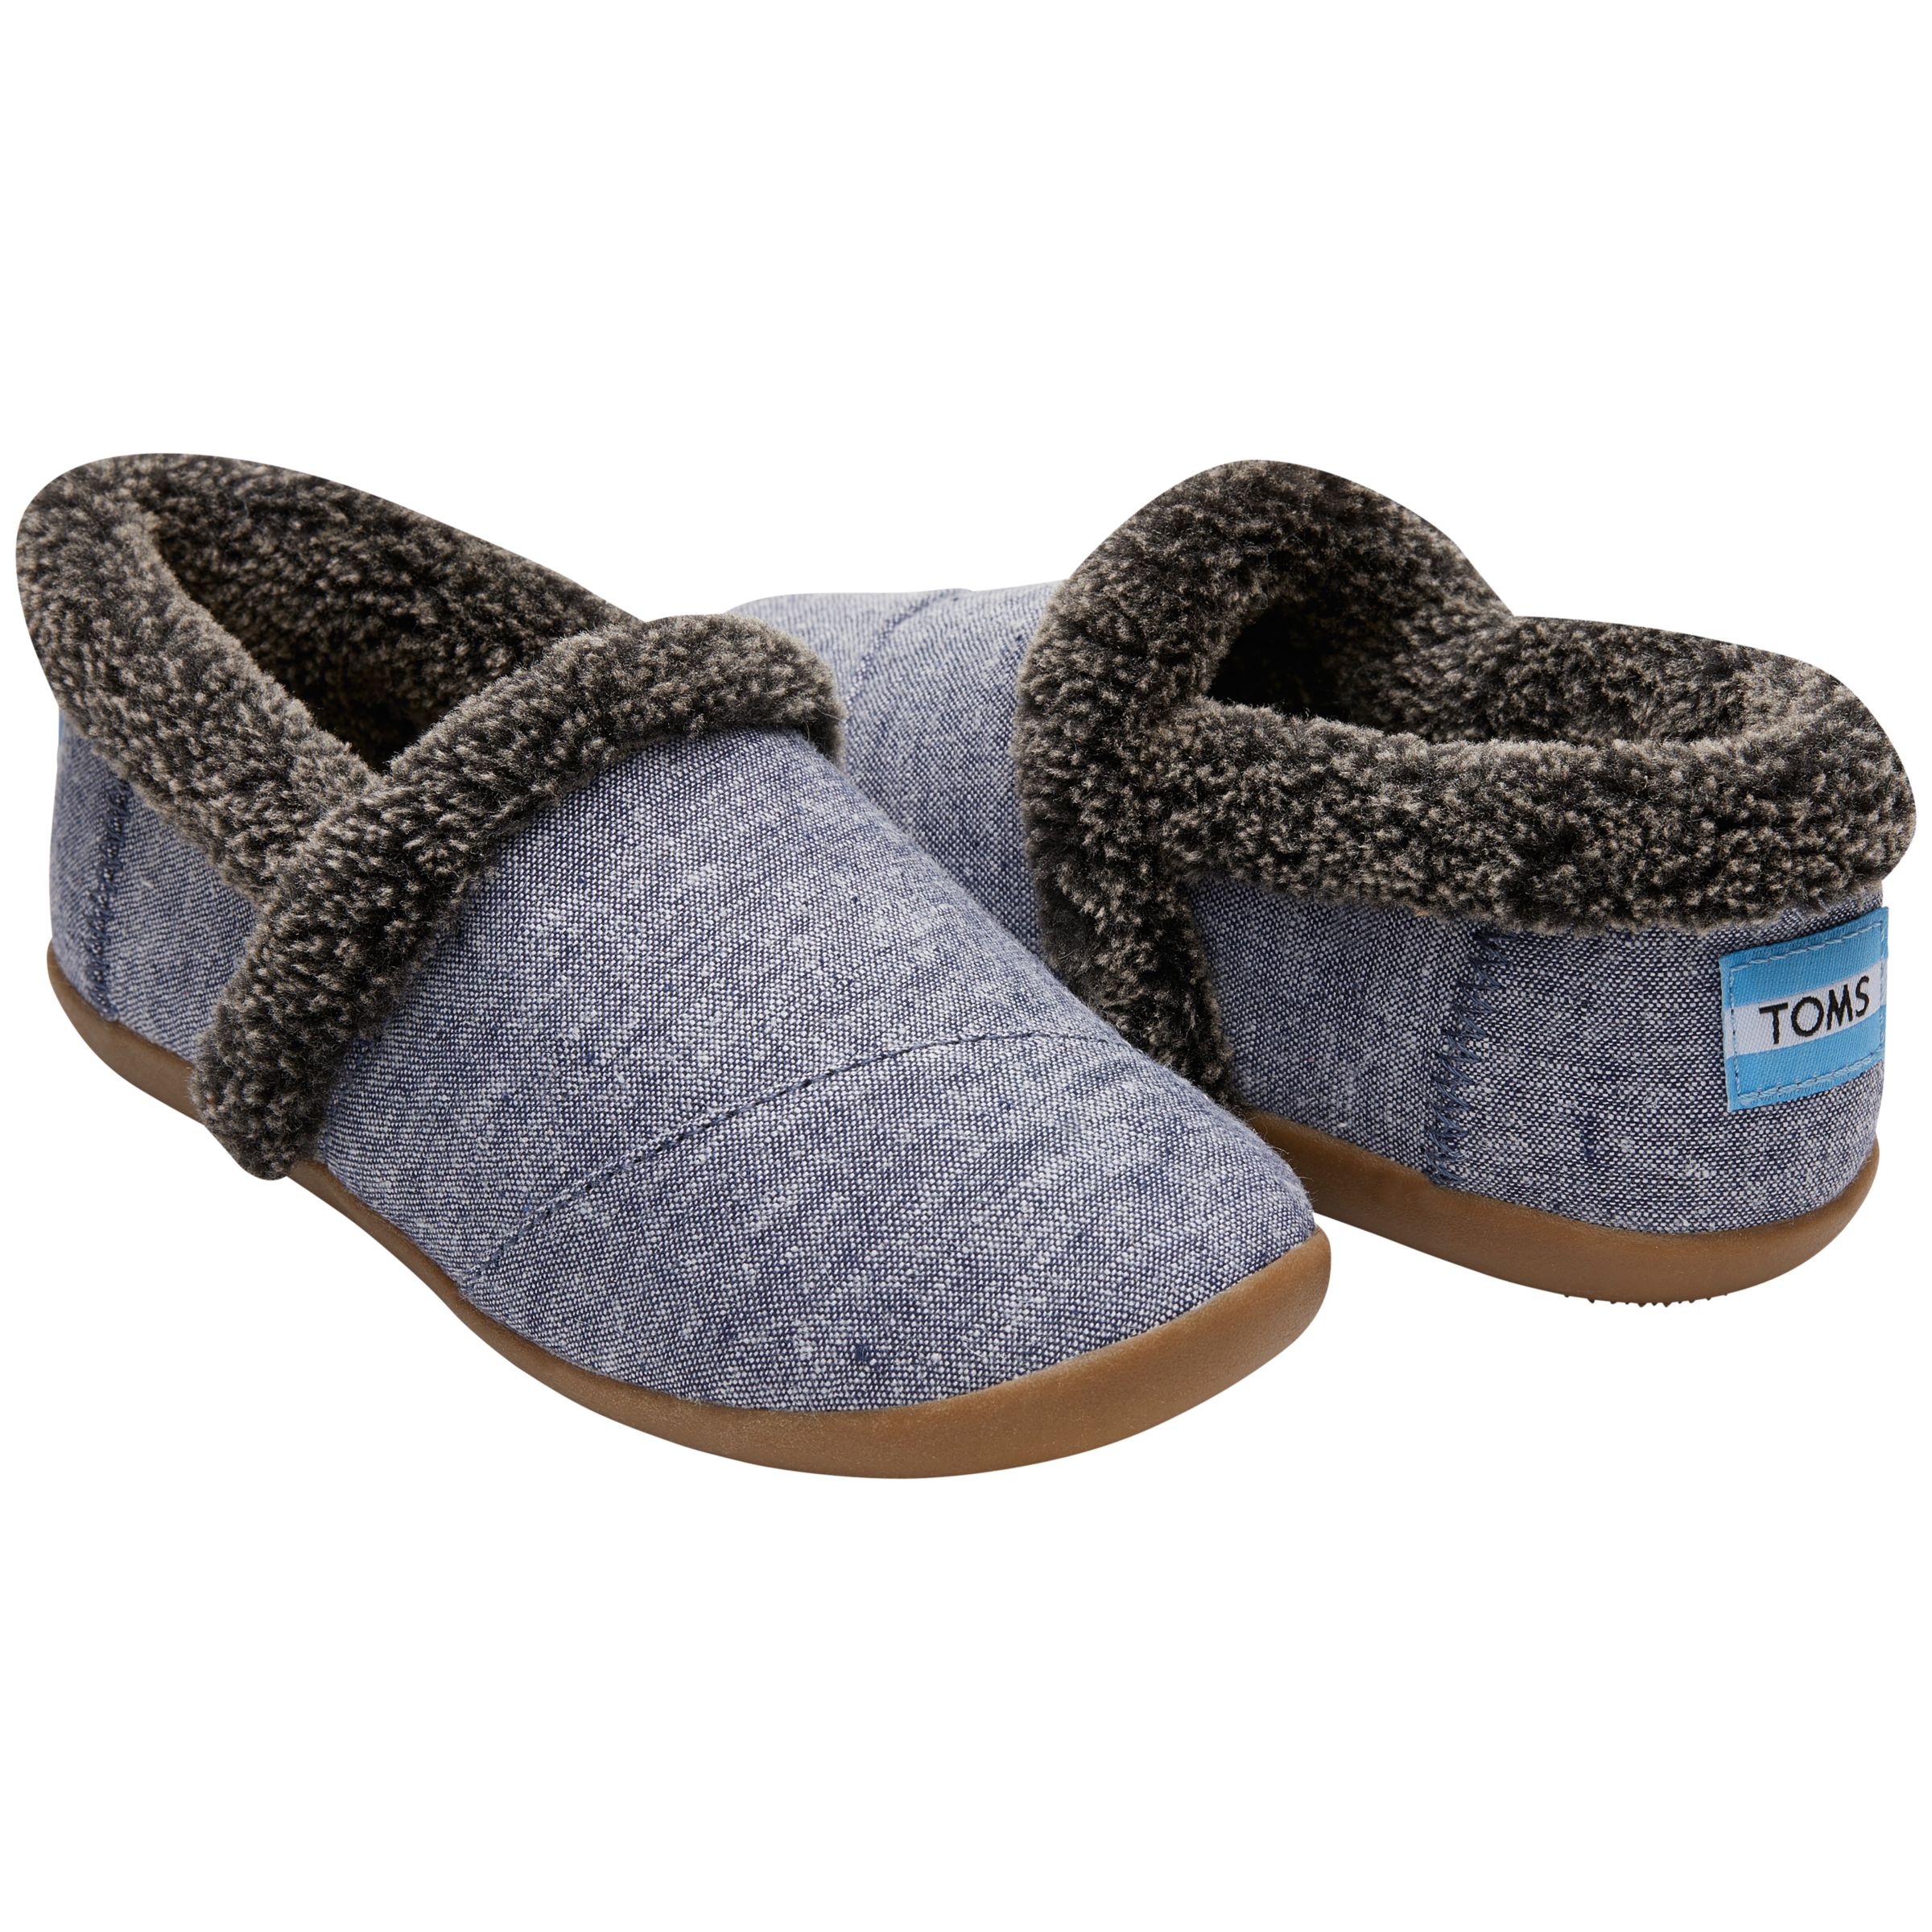 TOMS House Slippers, Chambray, 11 Jnr